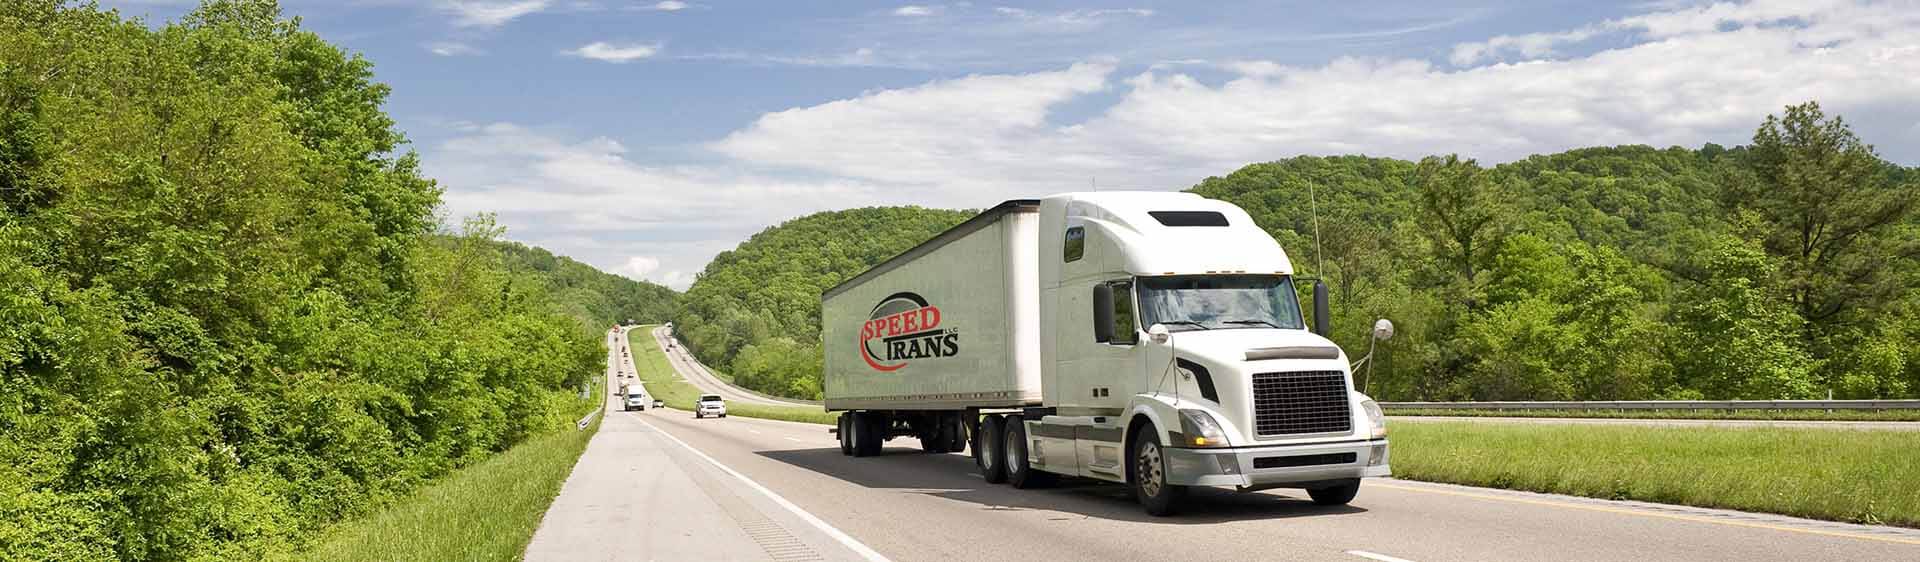 Kent Trucking Company, Trucking Services and Long Haul Trucking